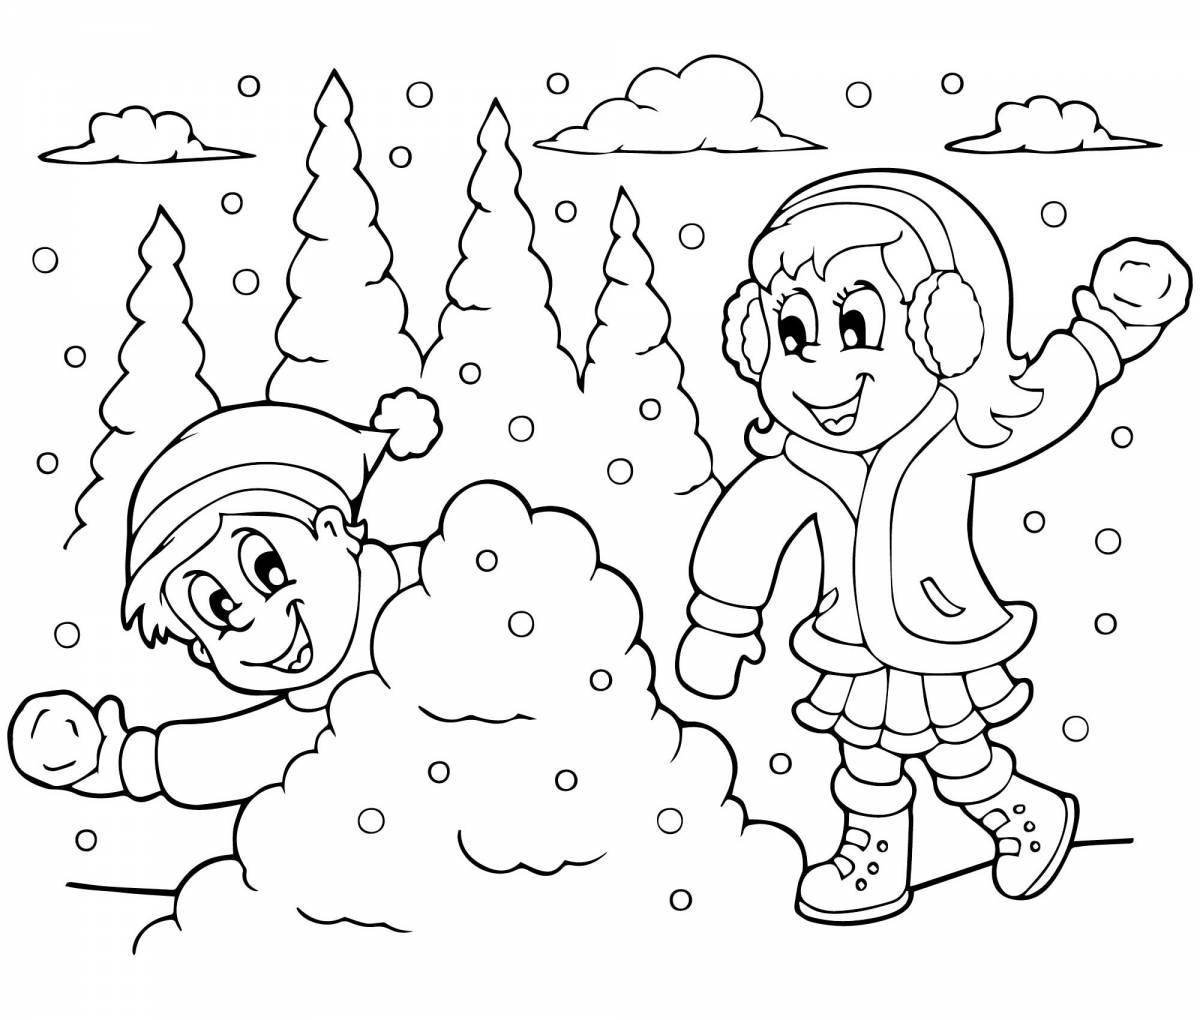 Glorious coloring book winter fun for 6 year olds